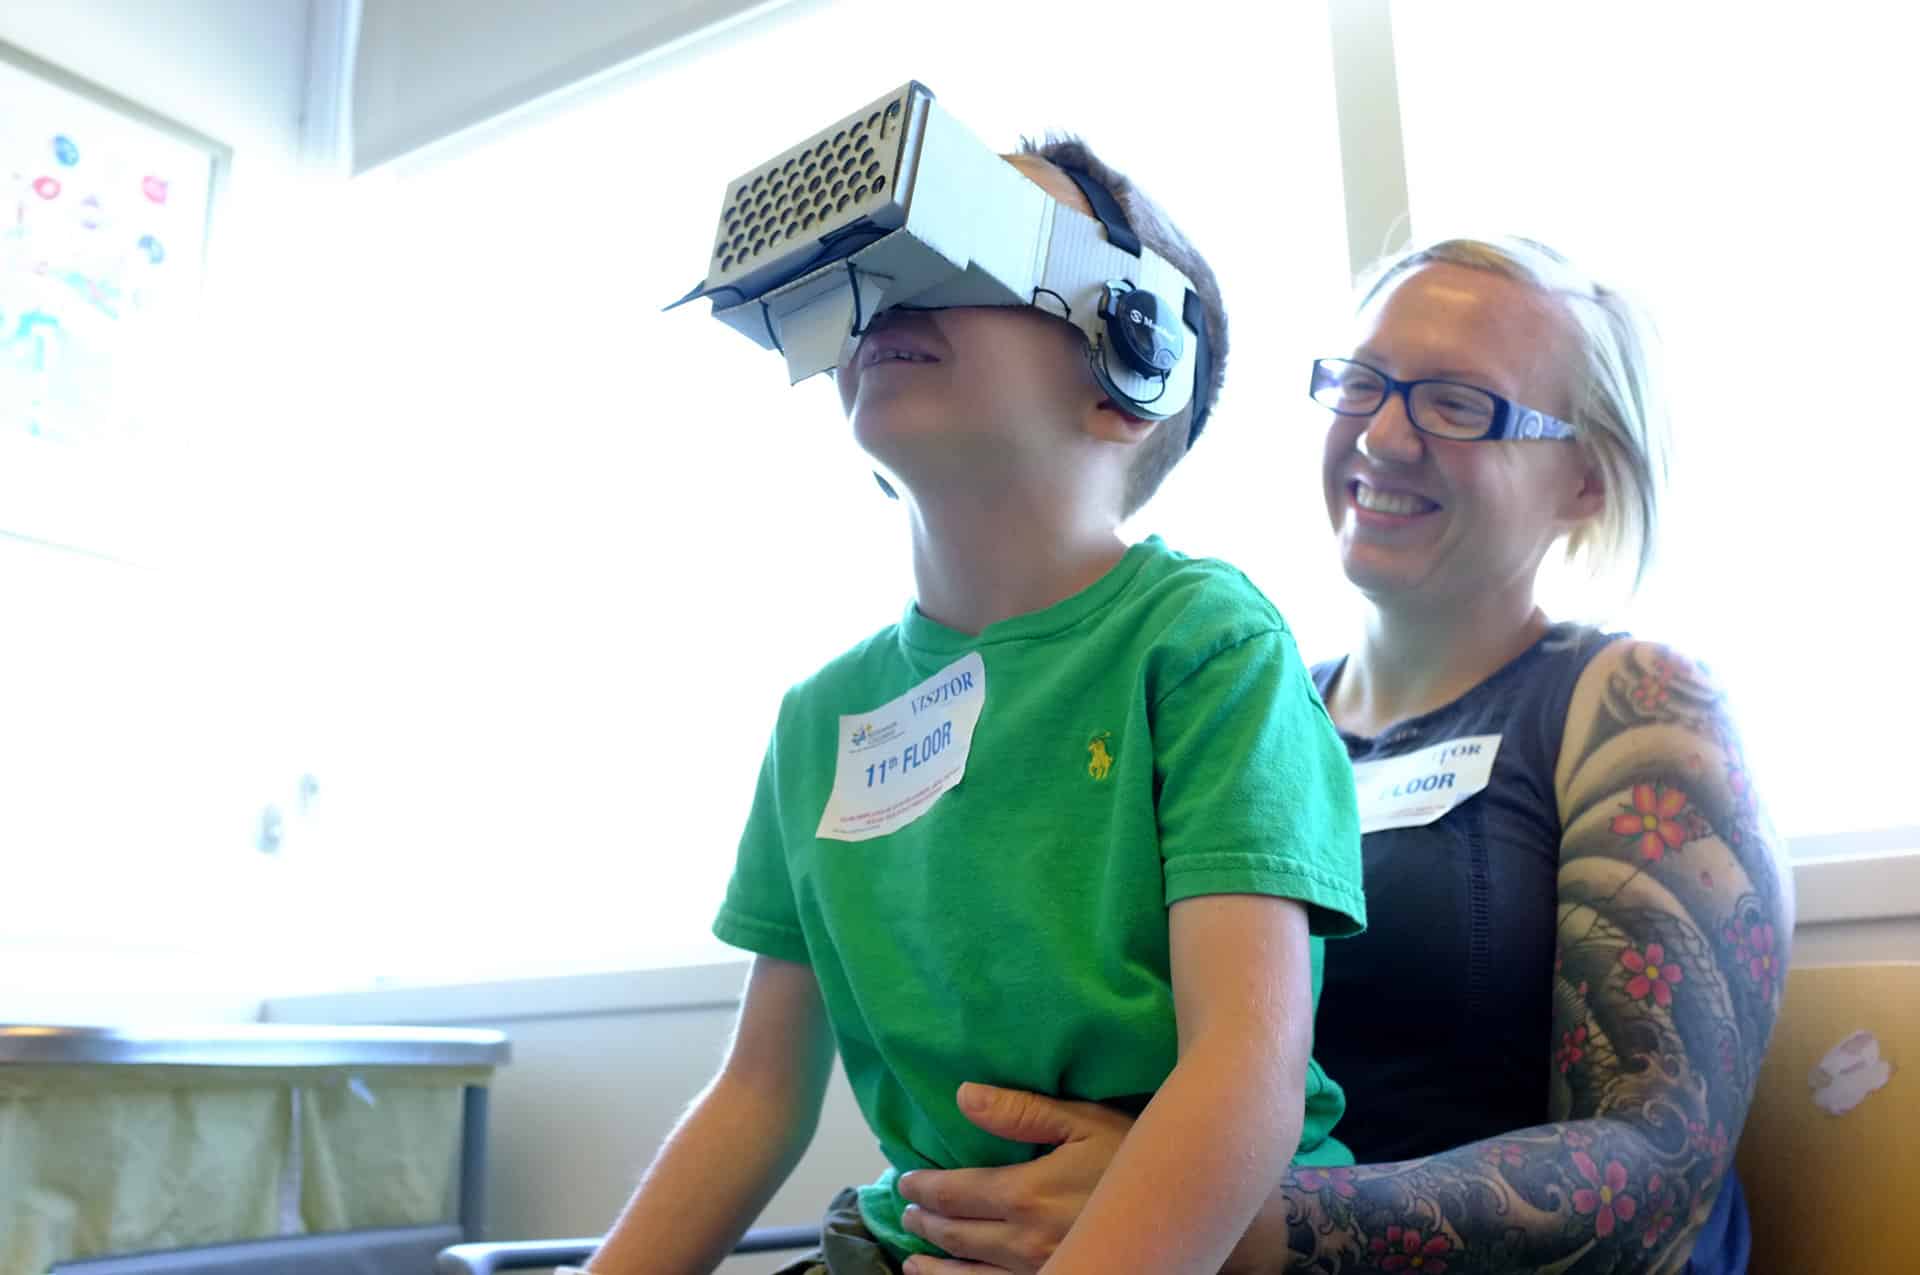 https://littleseed.io/wp-content/uploads/2021/11/LittleSeed-Voyager-VoxelBay_Virtual-Reality-VR-Pediatric-Anxiety-Relief-Headset-Patient1.jpg